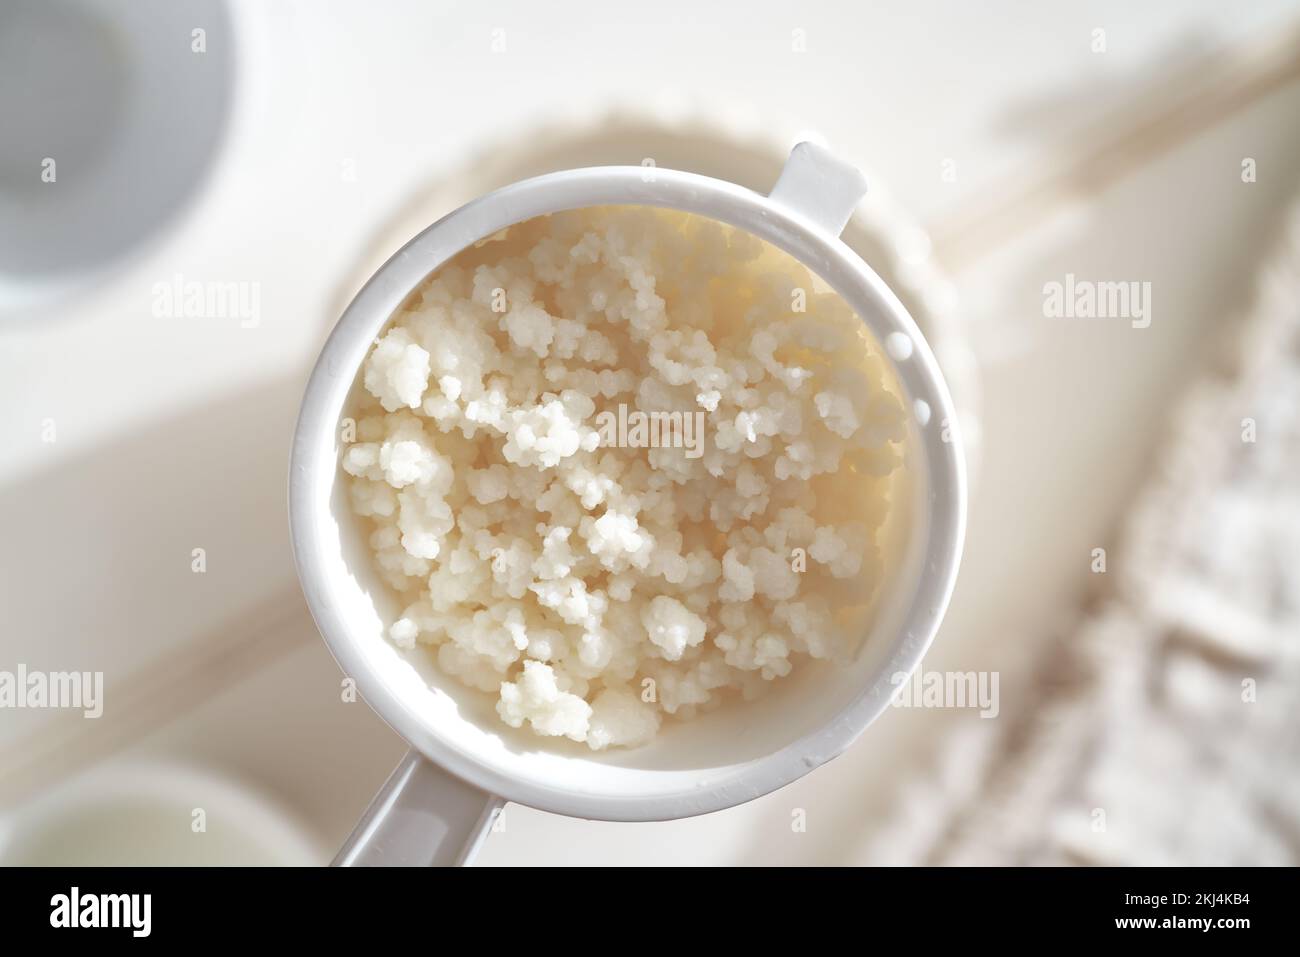 Fresh kefir grains used for making a probiotic milk drink, top view Stock Photo